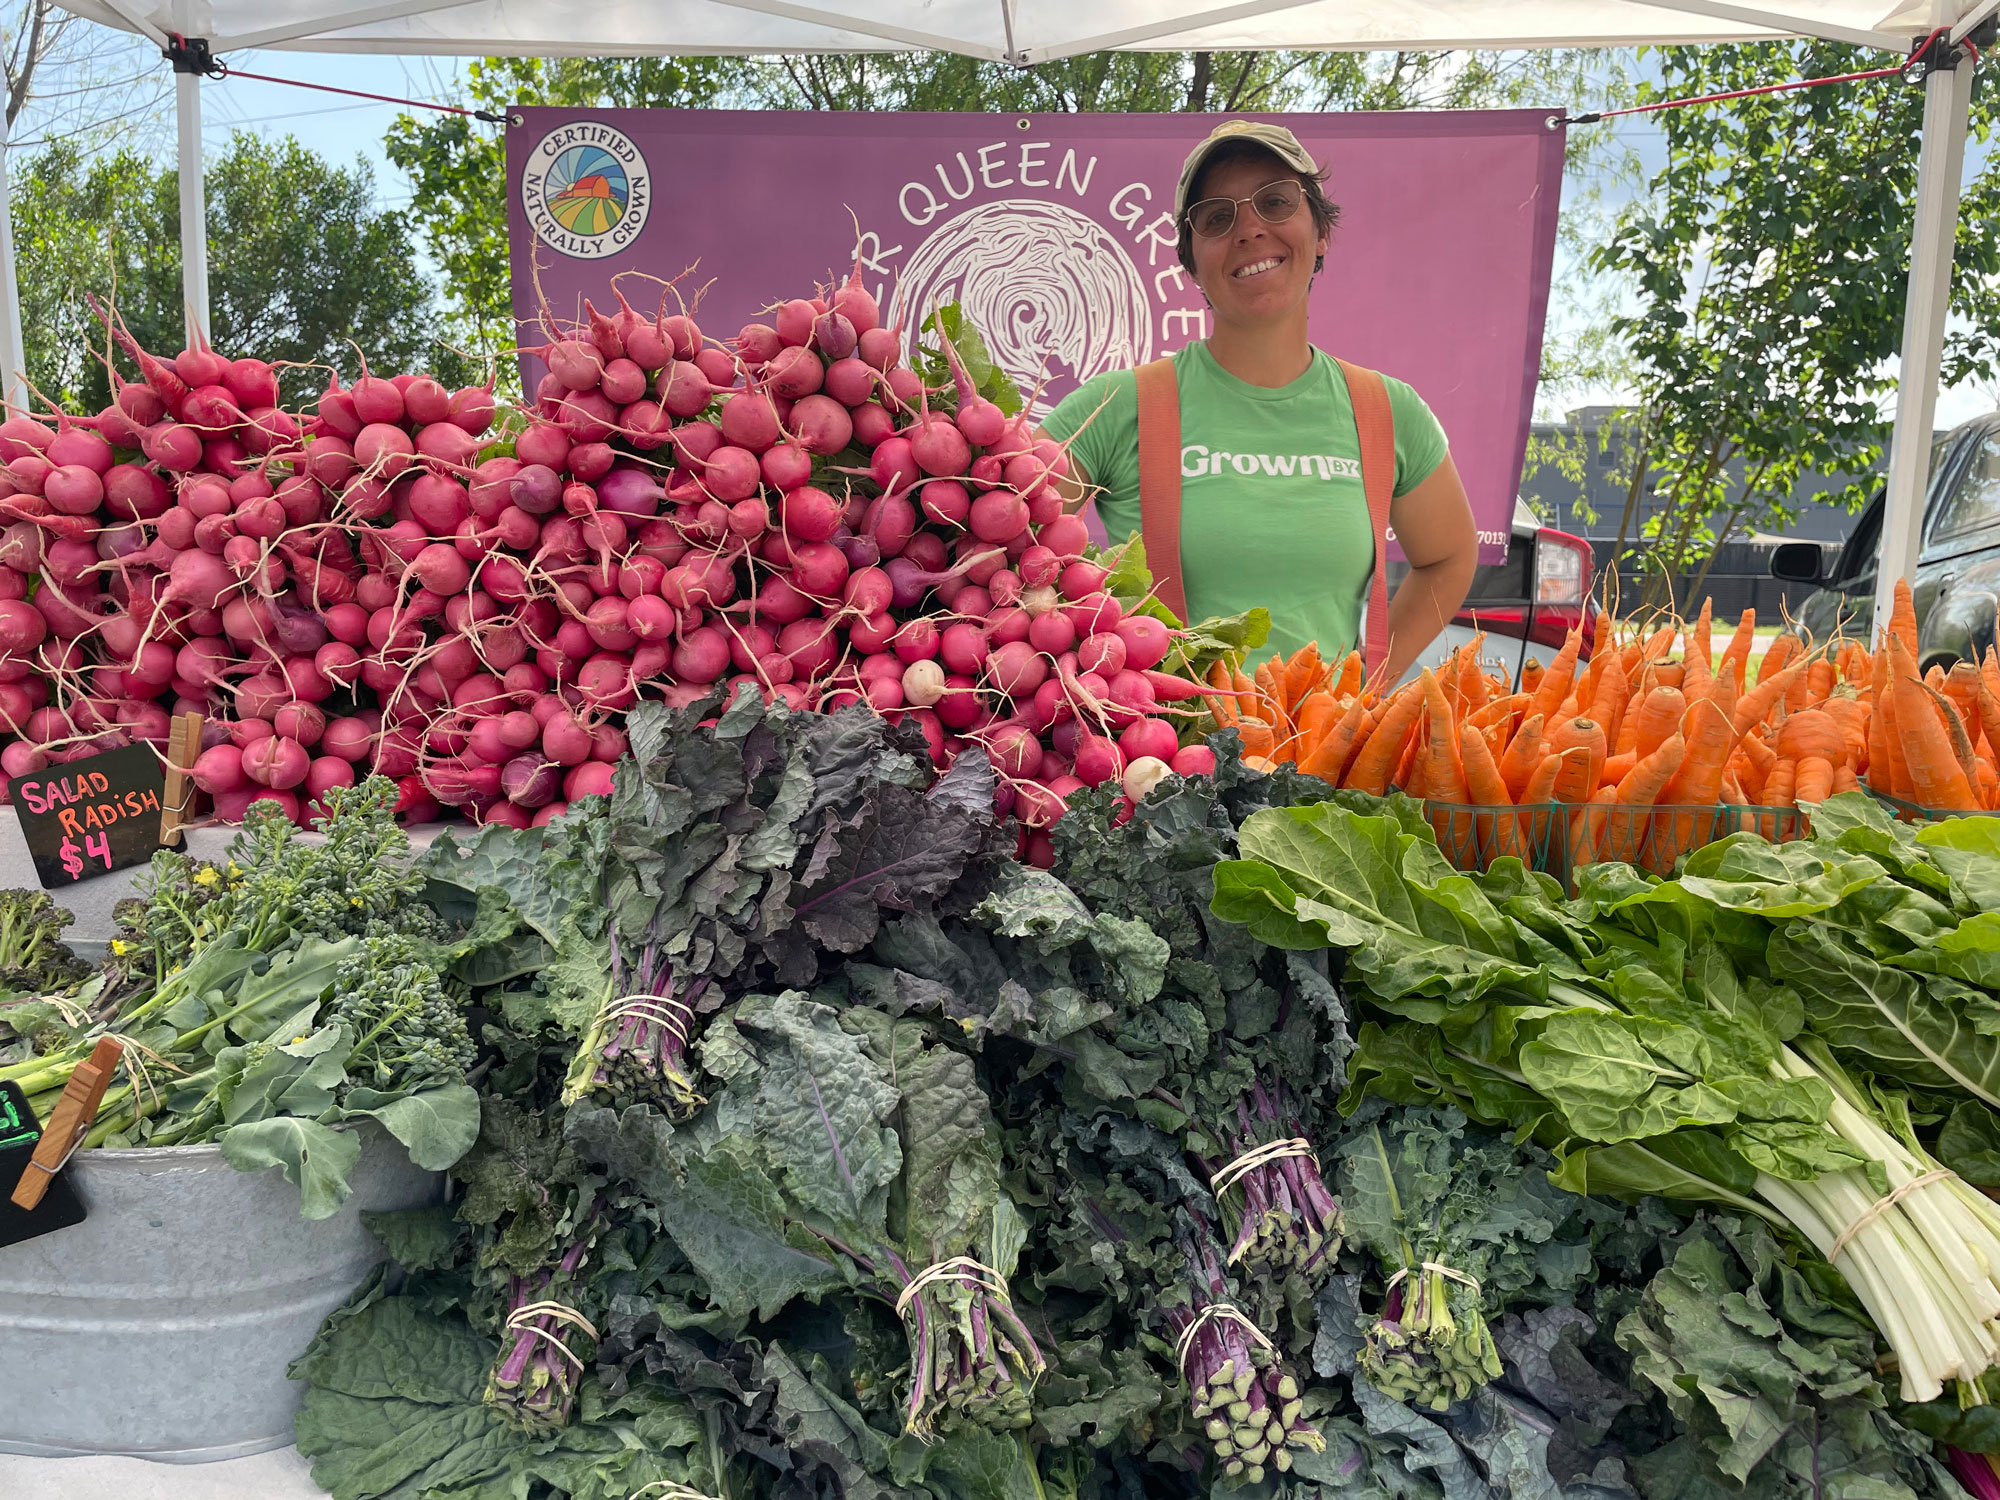 A woman smiling behind fruits and vegetables on a stand